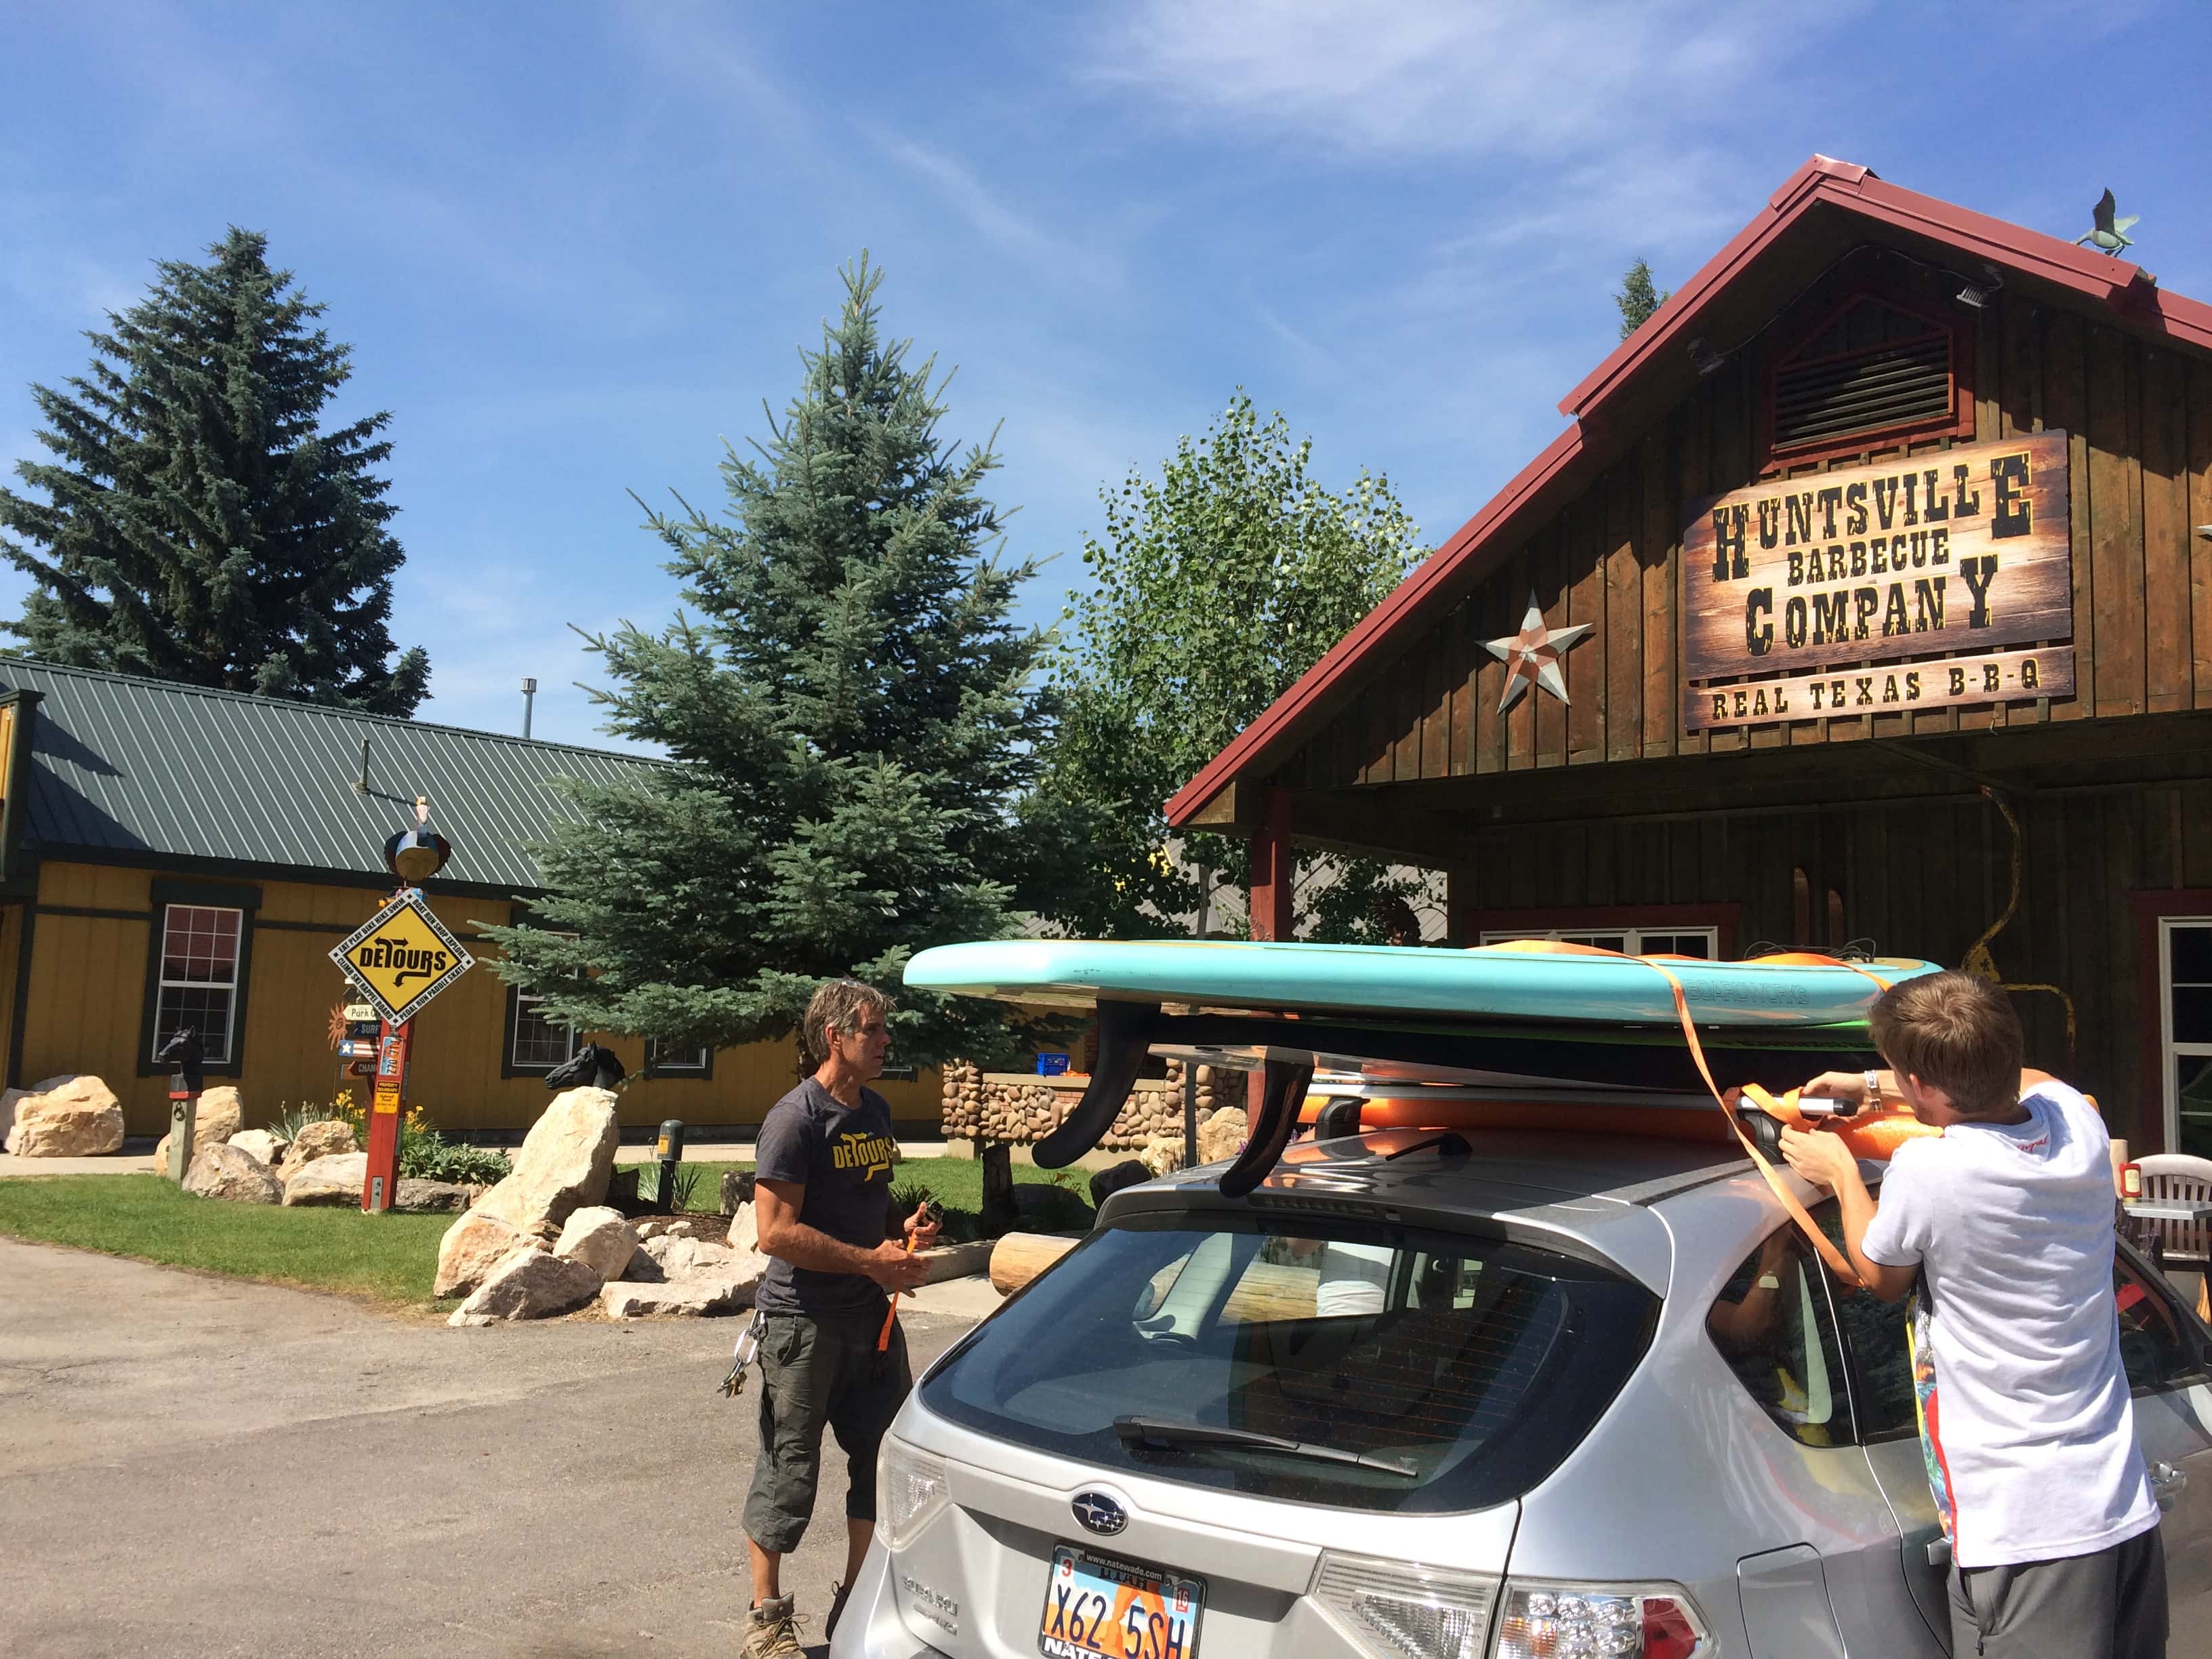 Detours Utah - a Stand-up Paddle Boarding rental shop in Huntsville near the Causey Reservoir